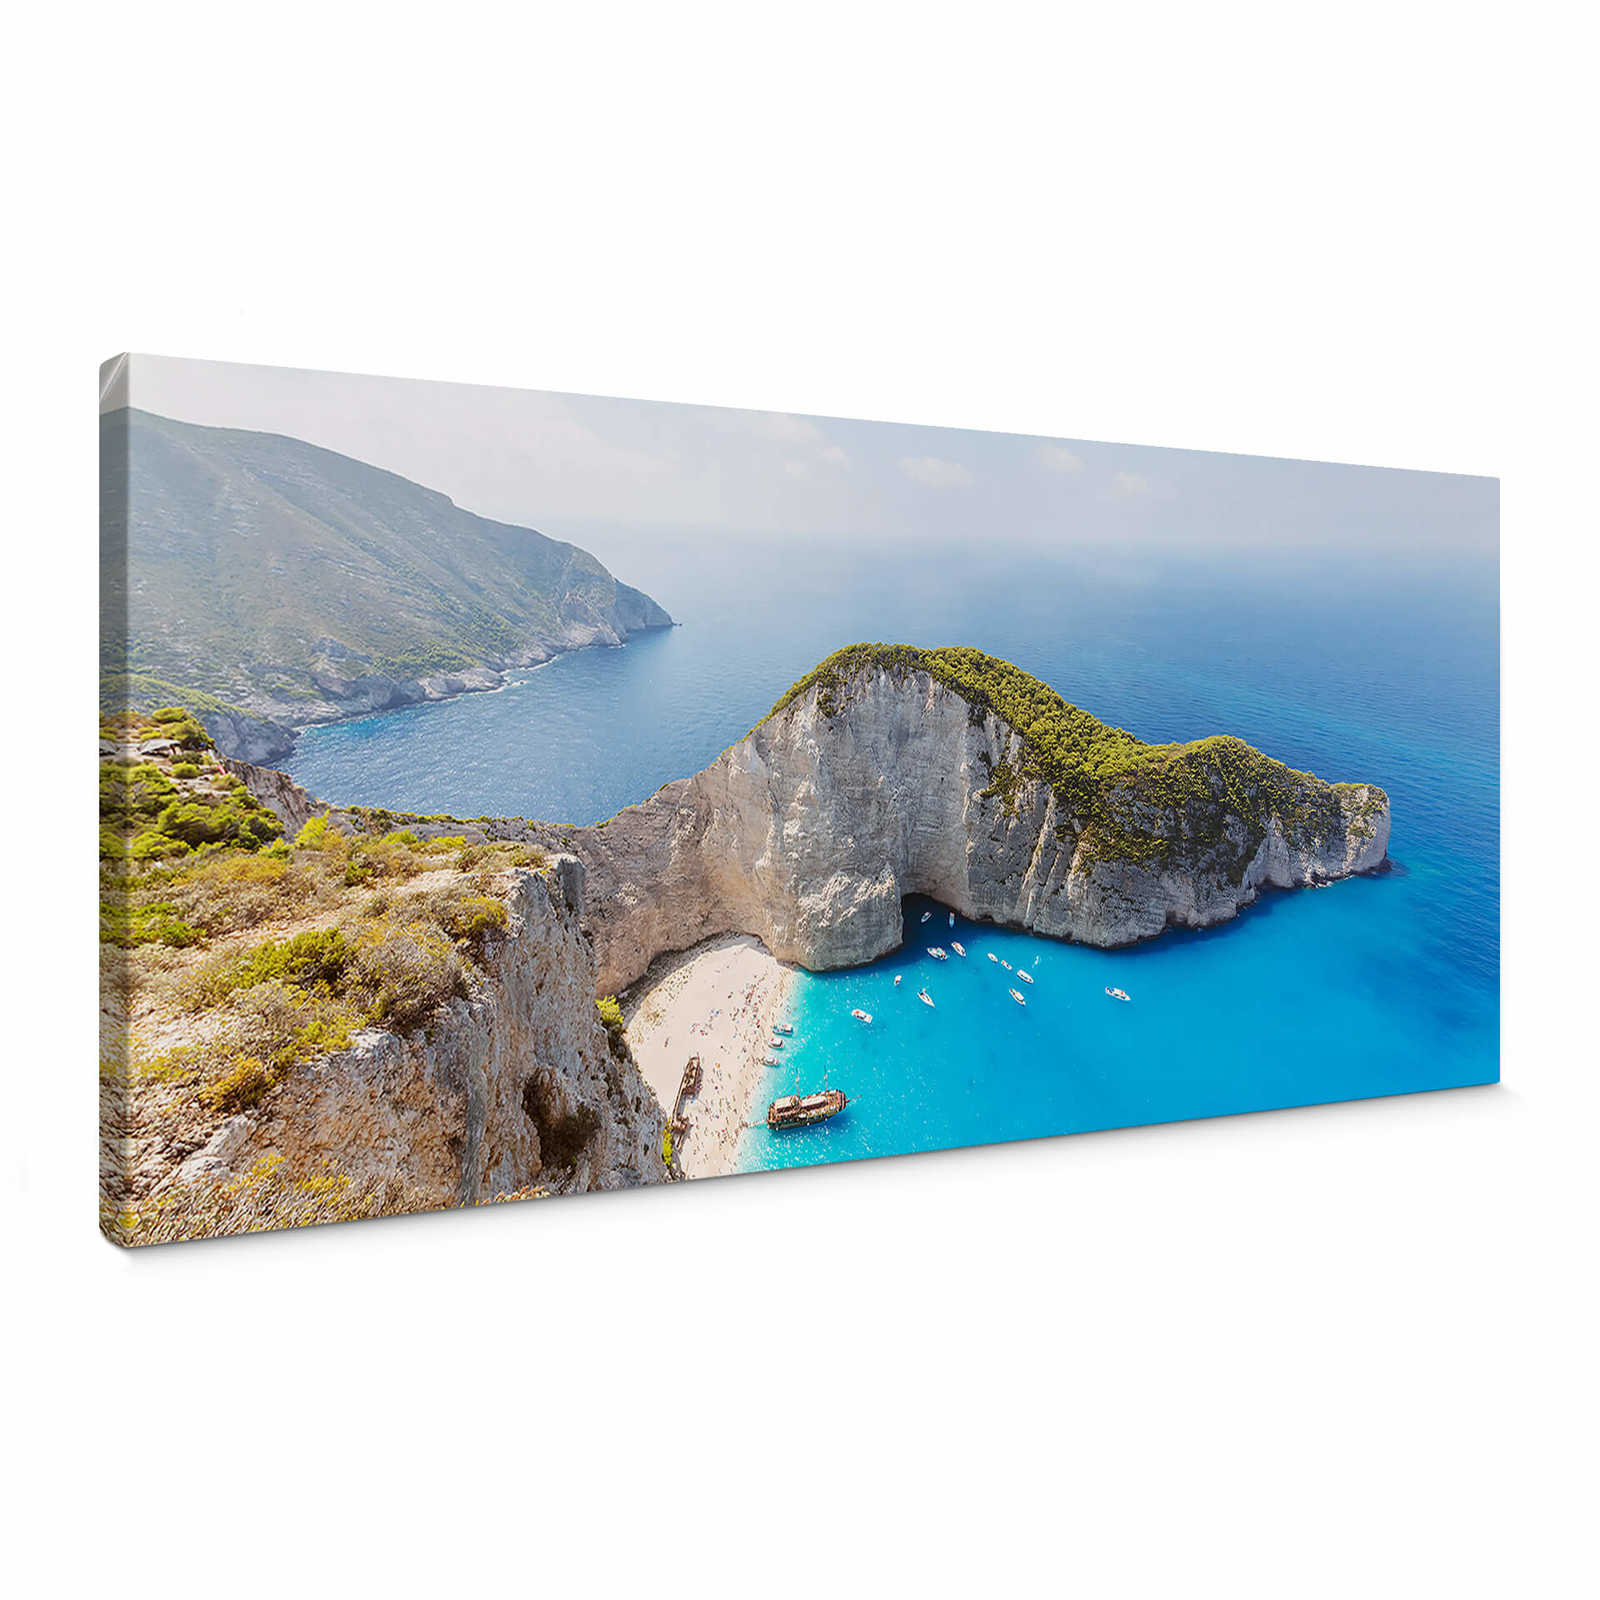         Panorama canvas print beach motif in blue and green
    